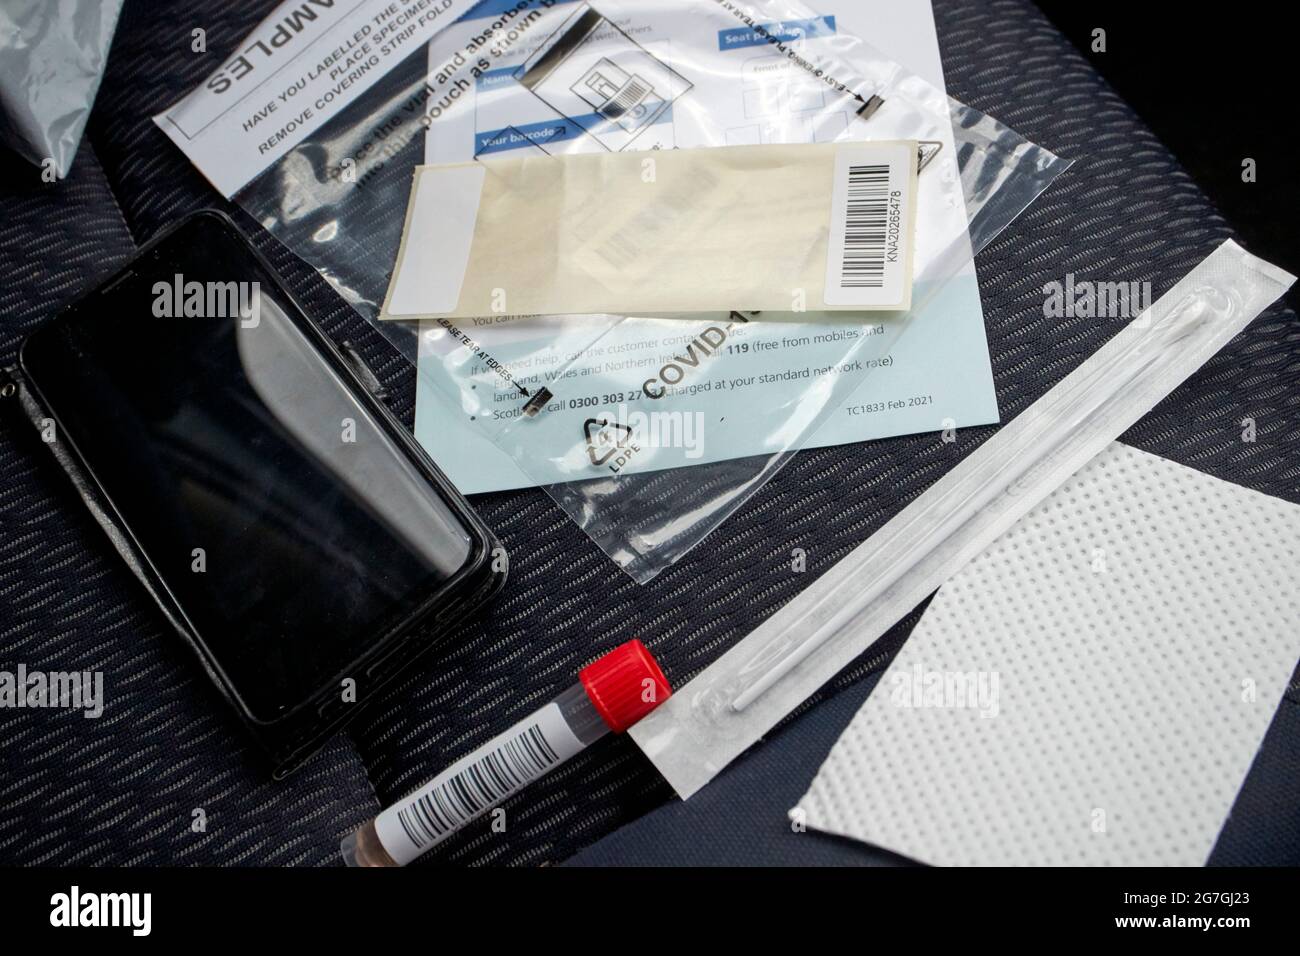 Covid-19 pcr test kit on the passenger seat of a car at a drive through test centre Stock Photo